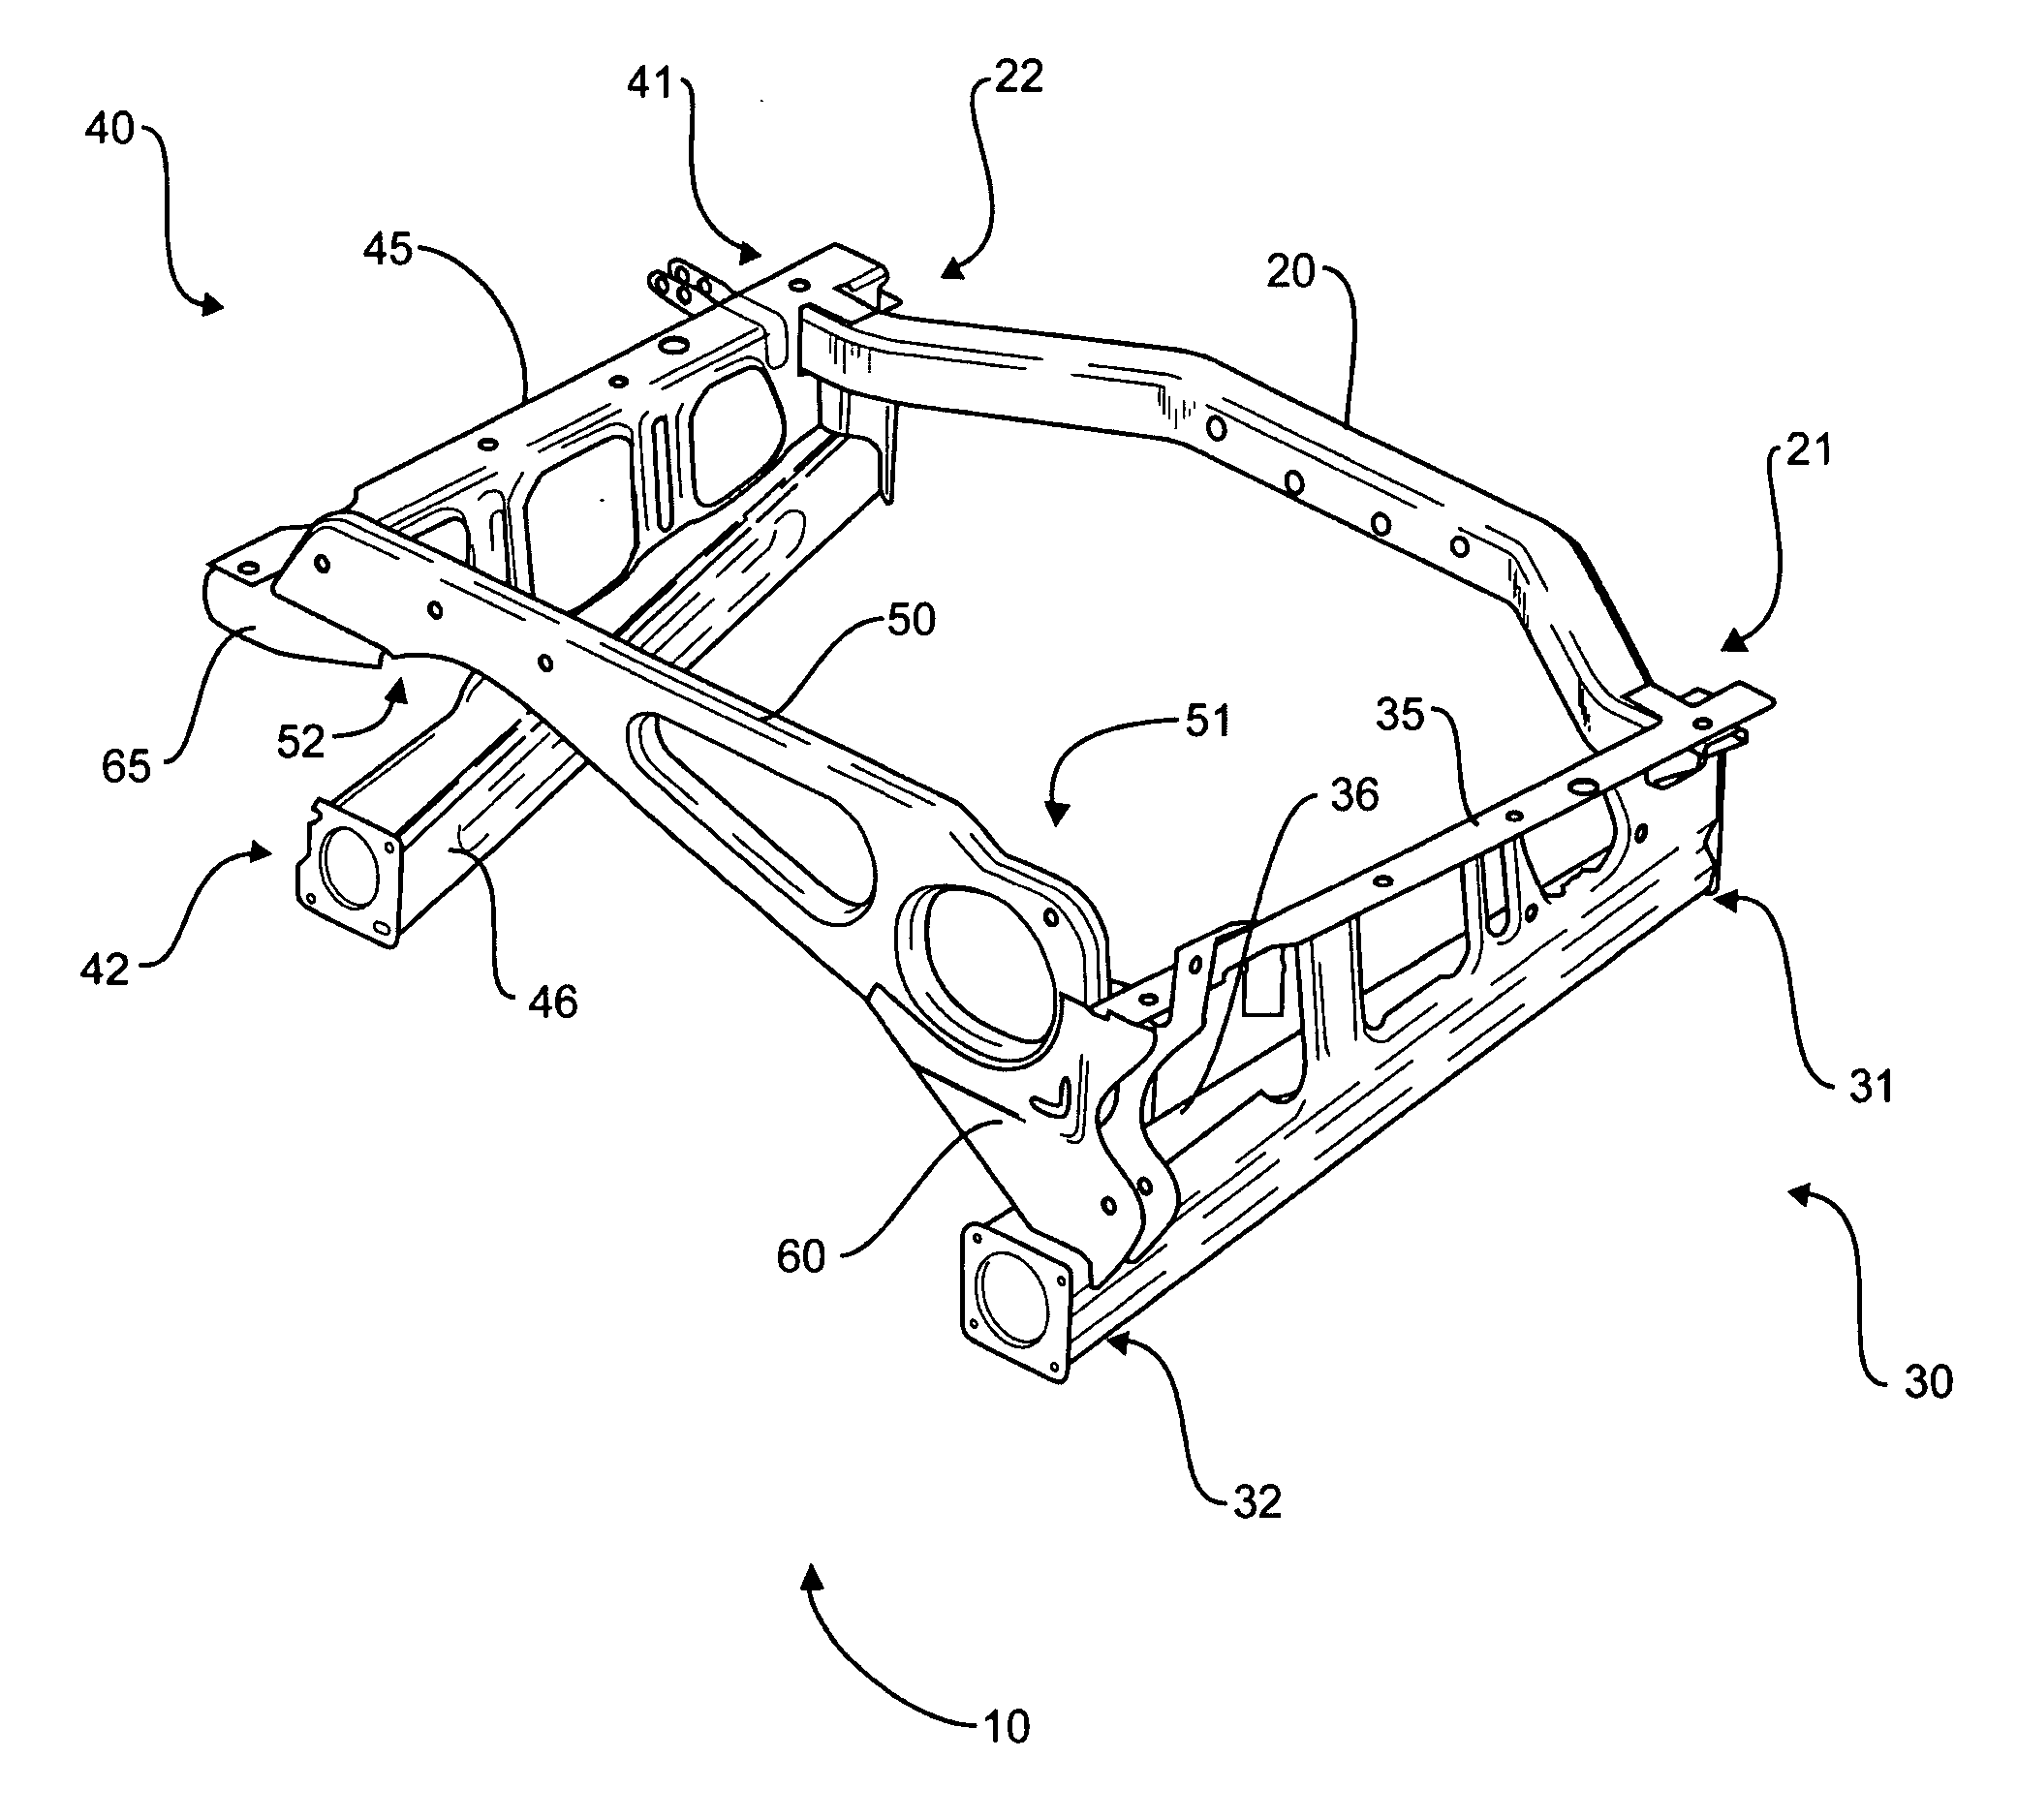 Force redistributing system for a vehicle in the event of a rear impact